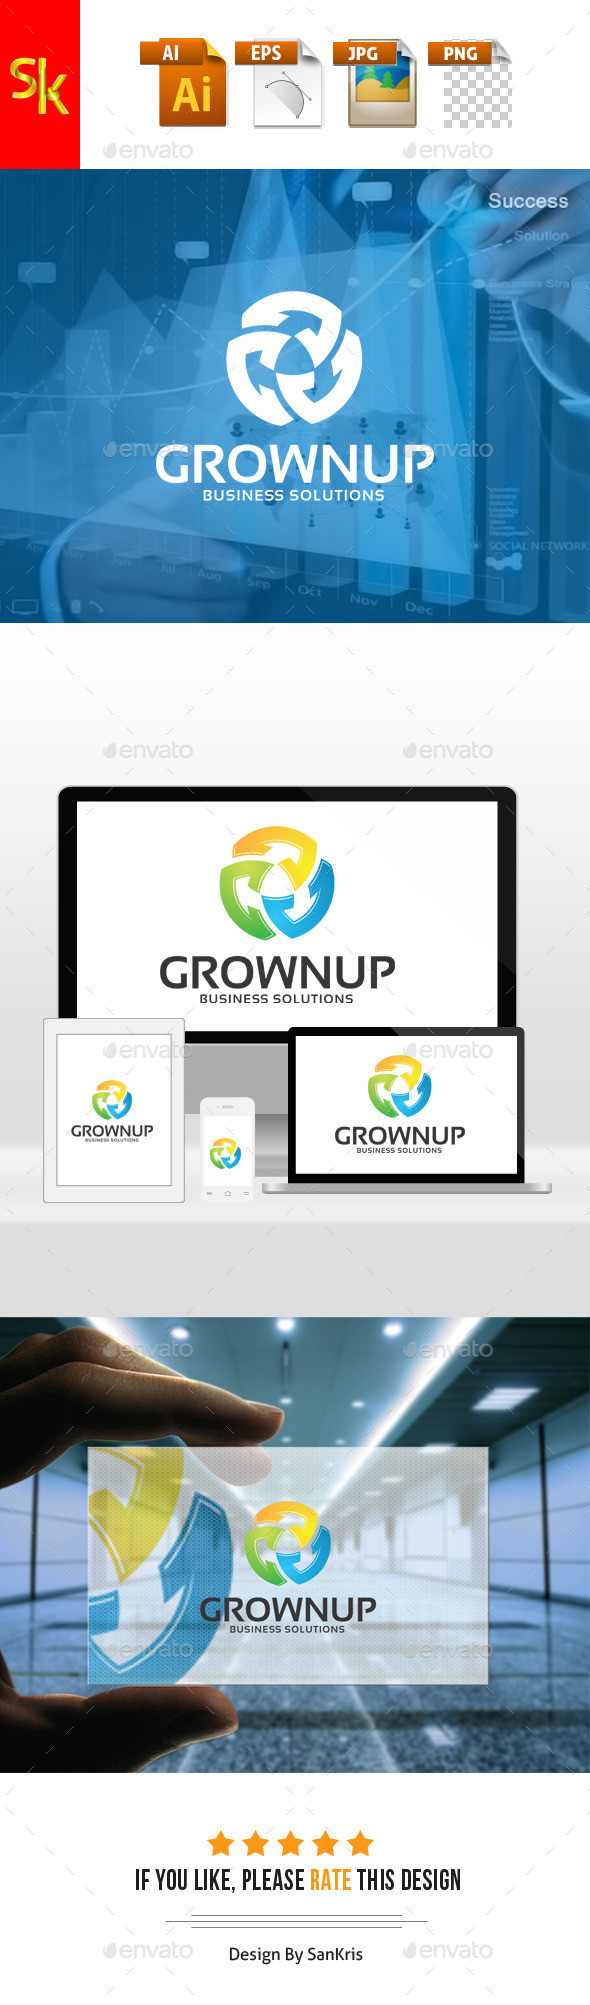 Grownup business preview